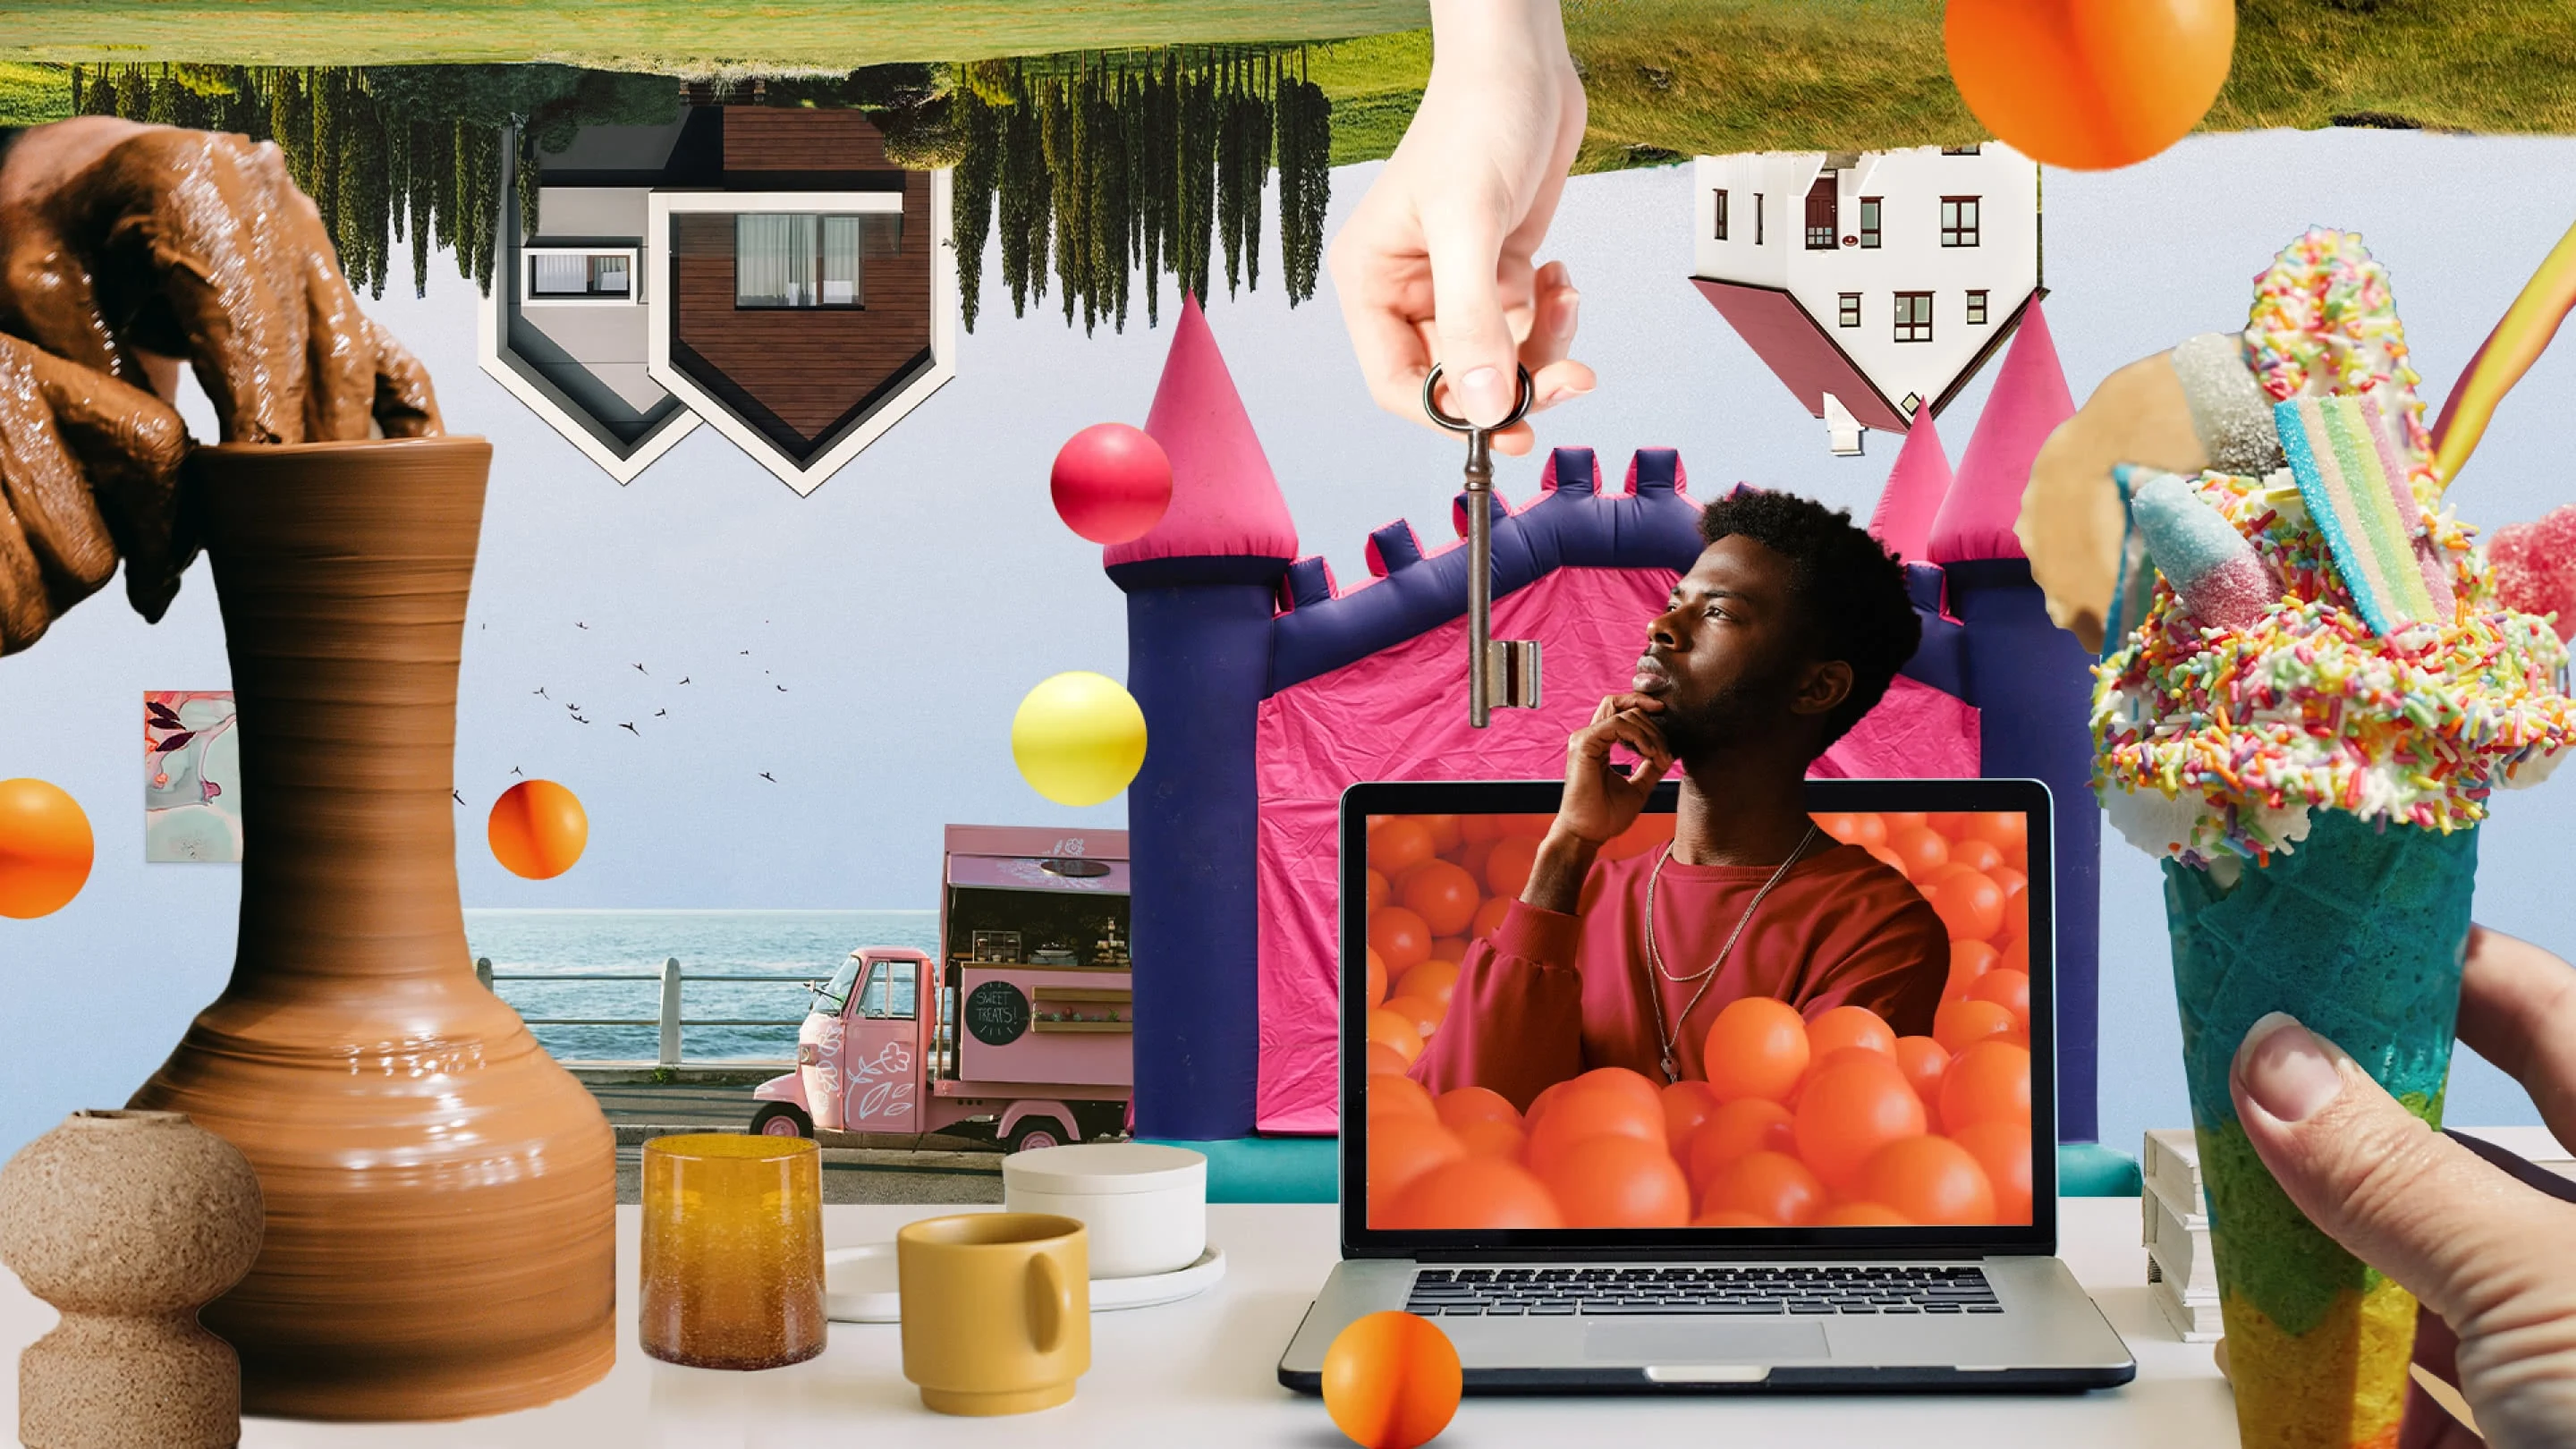 Colorful collage: upside down countryside at top. Hands molding a vase at left. Colorful ice cream and sprinkles with blue cone at right. Black man in a red shirt ponders as a key is handed down to him from top.